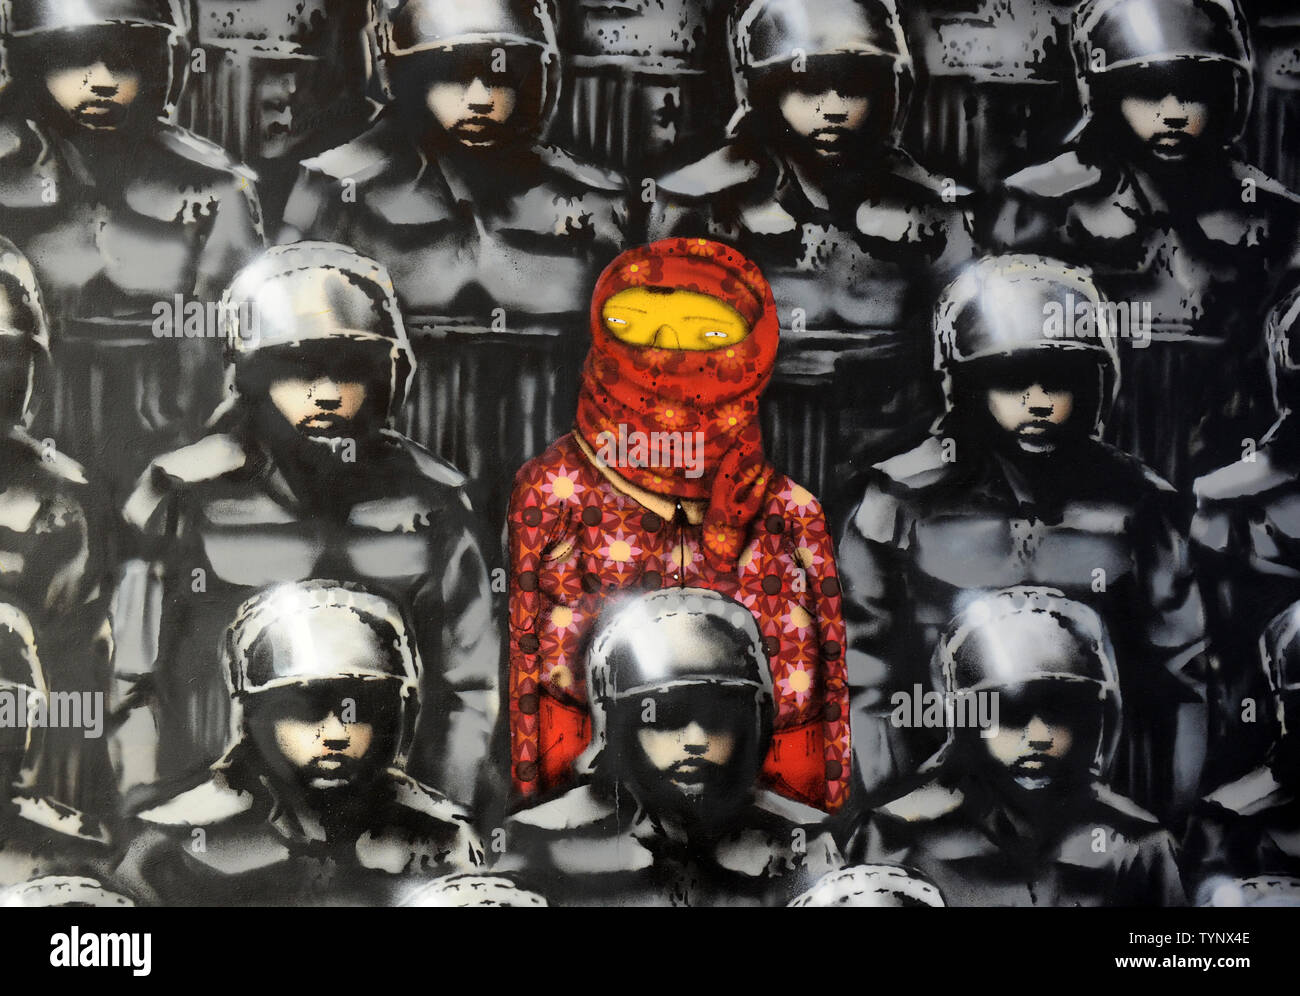 A close look at an art work created by British street artist Banksy stands at a temporary outdoors exhibition space on the west side of Manhattan in New York City on October 18, 2013. Banksy is a pseudonymous England-based graffiti artist, political activist, film director, and painter. His satirical street art and subversive epigrams combine dark humor with graffiti done in a distinctive stenciling technique.    UPI/Dennis Van Tine Stock Photo